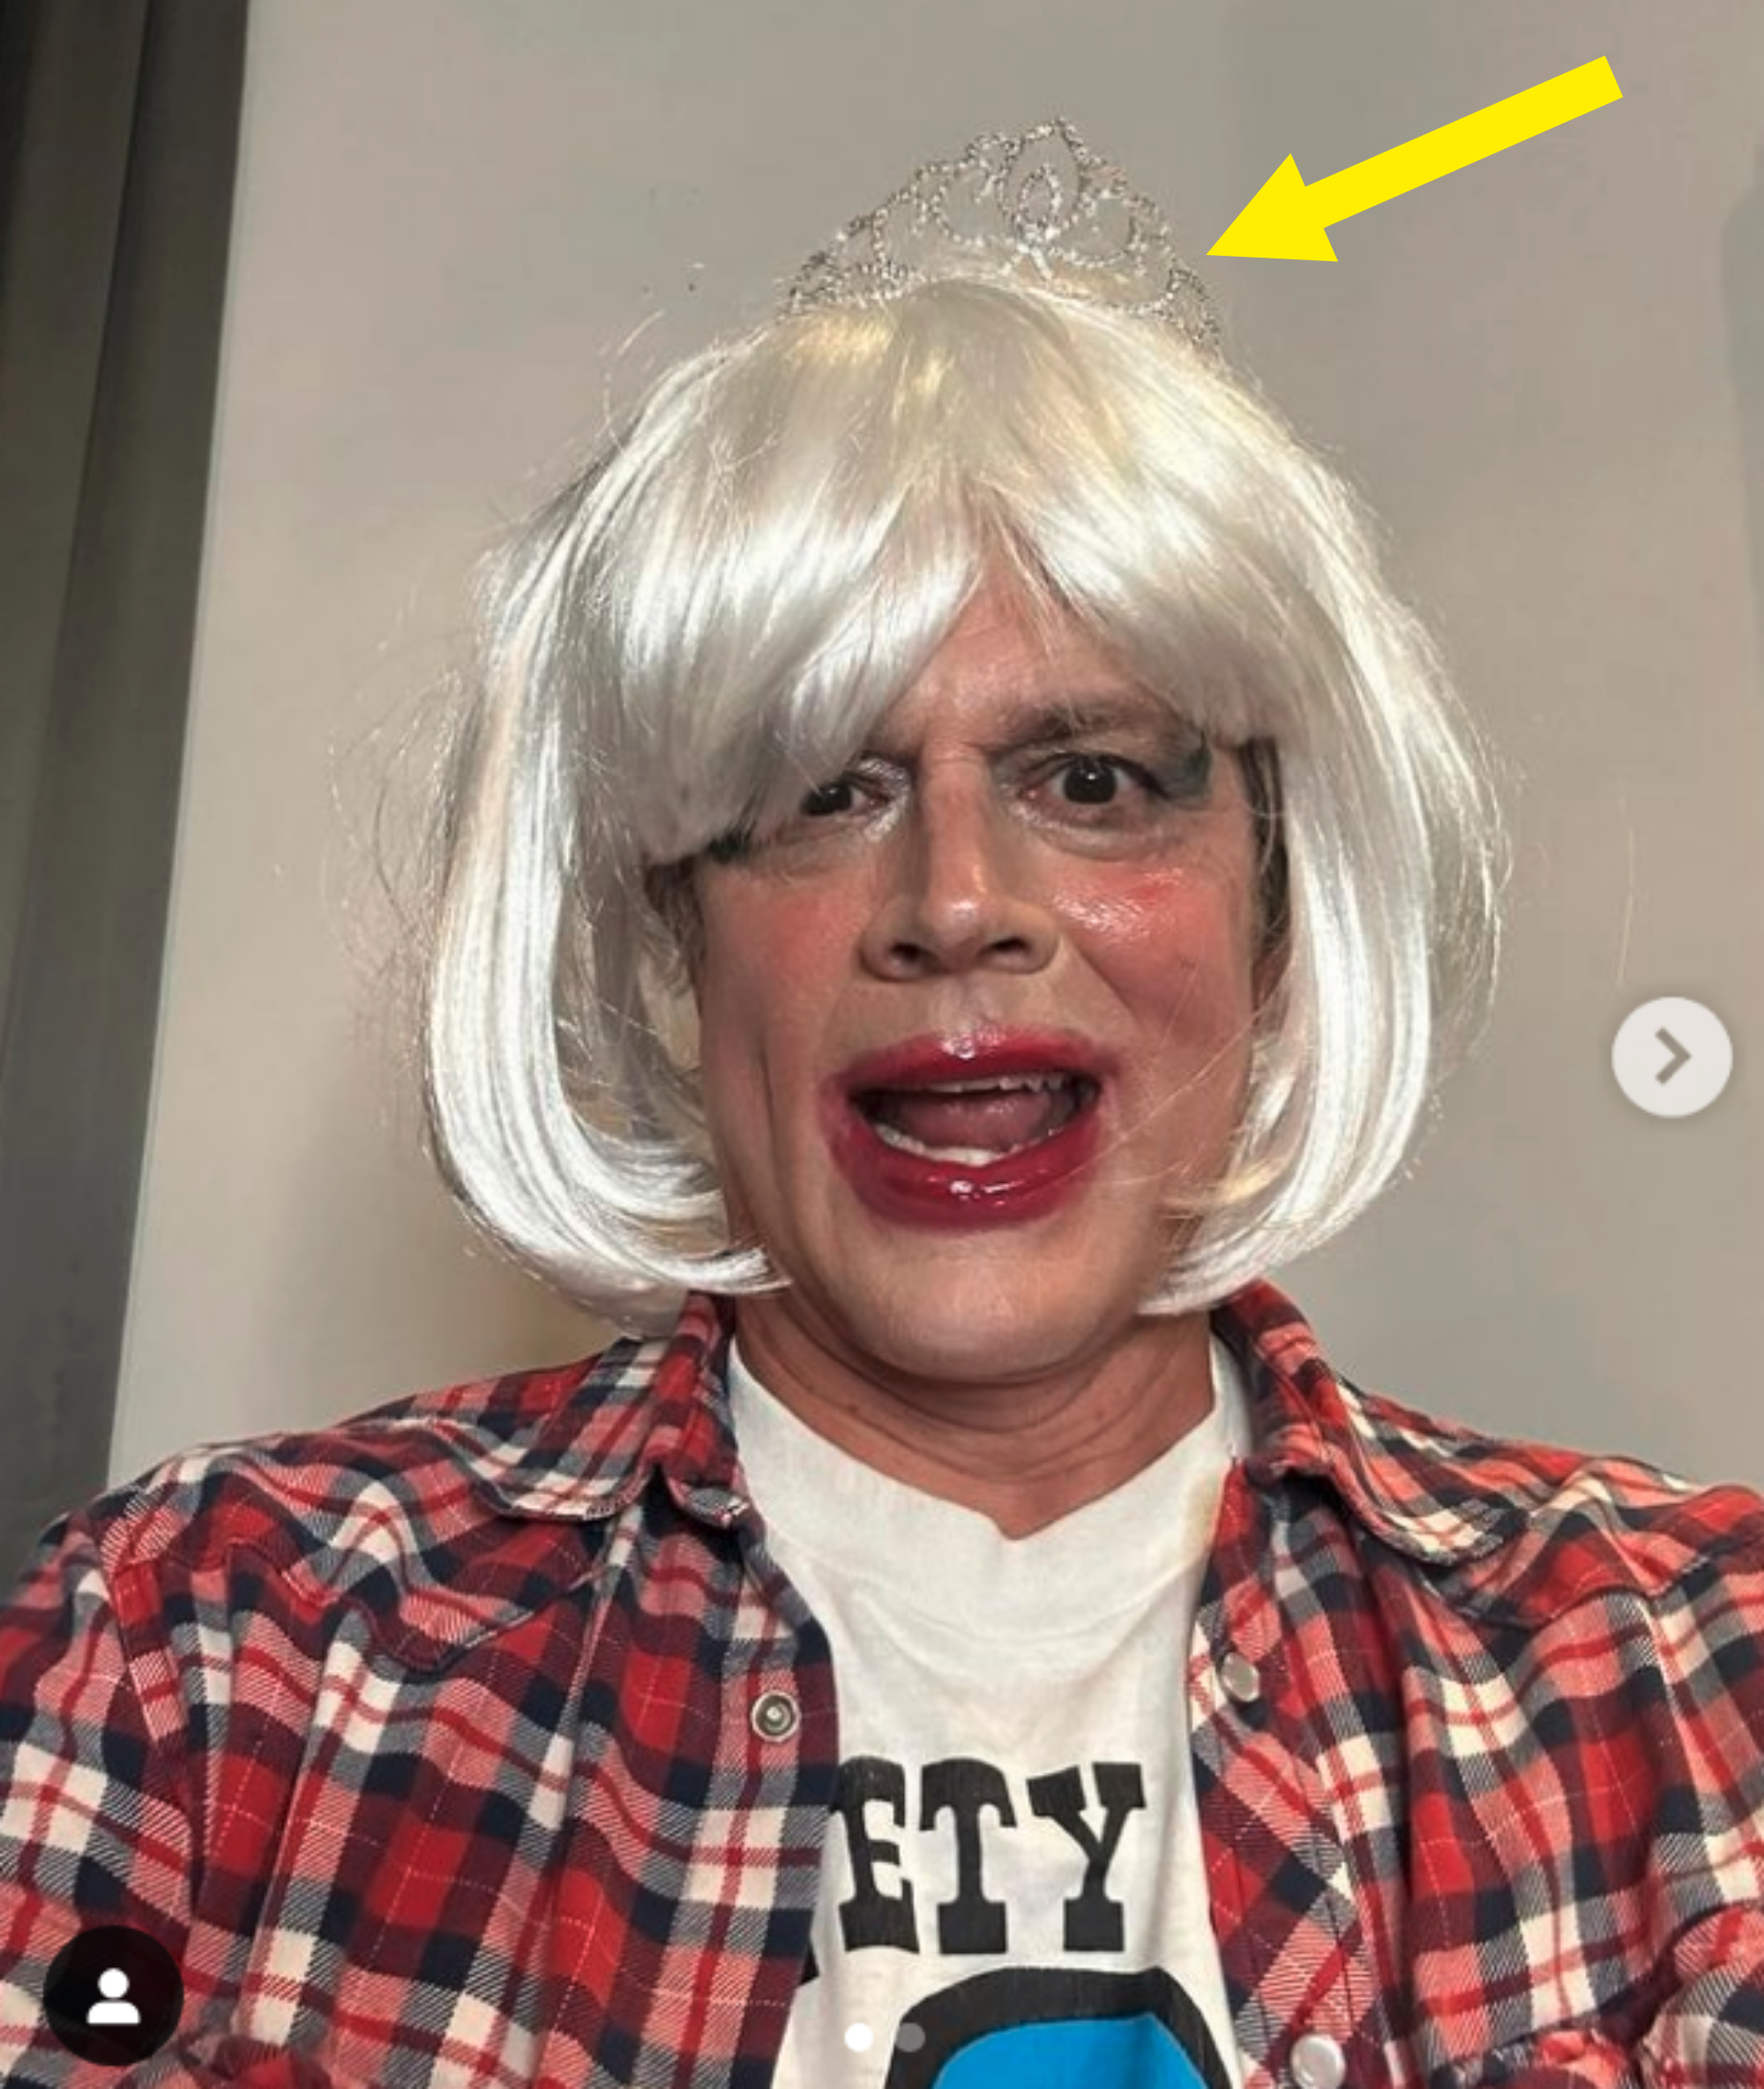 Johnny wearing a wig and tiara, plaid shirt over a t-shirt, with makeup on